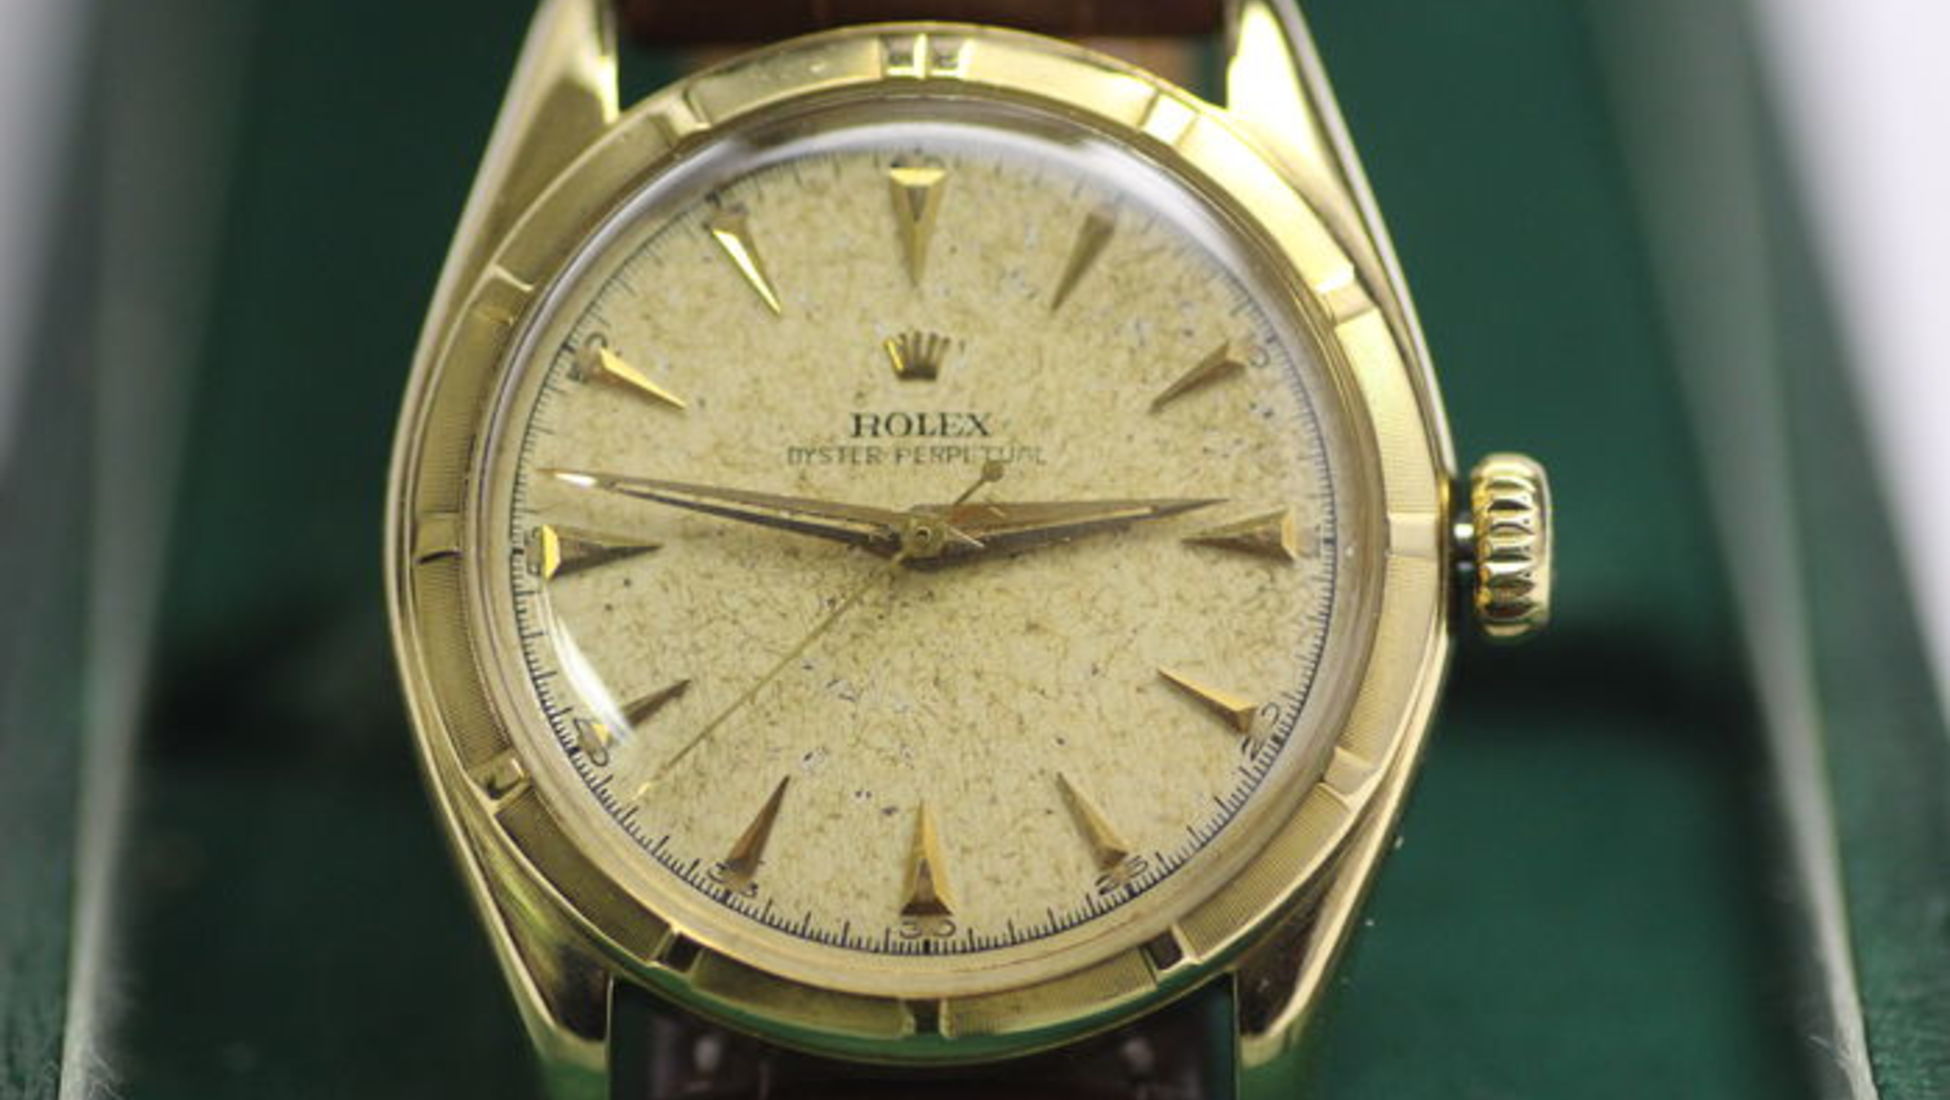 Watches for Sale in Online Auctions - Catawiki